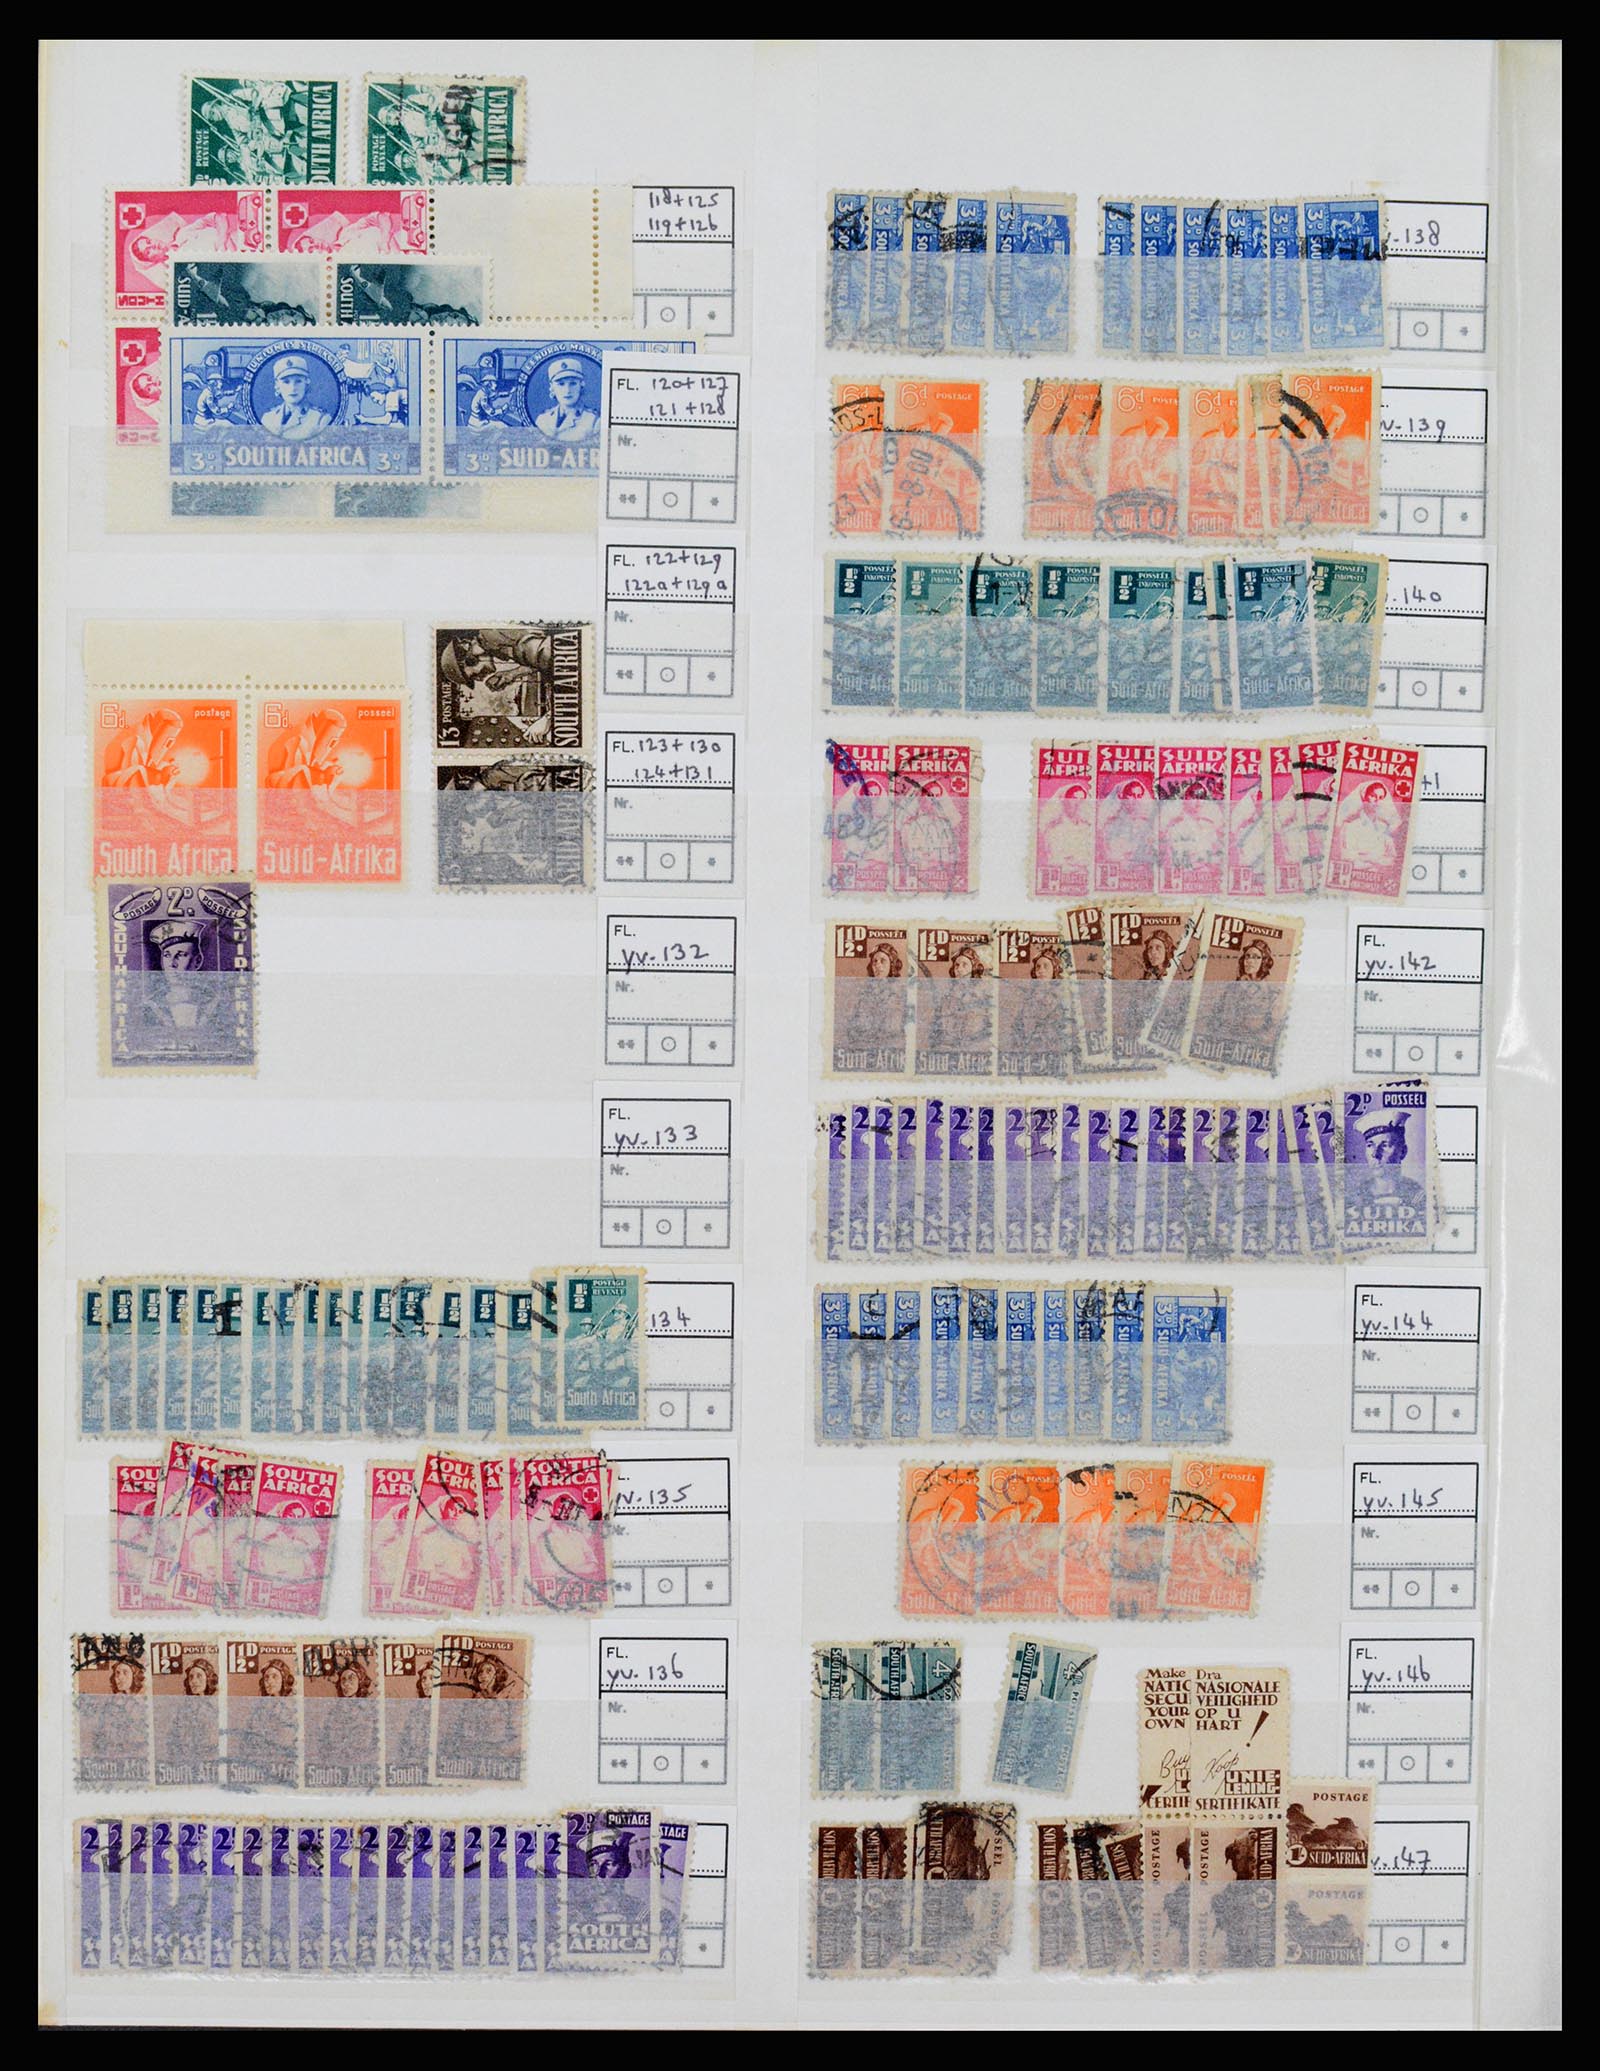 36743 010 - Stamp collection 36743 South Africa and homelands 1910-1998.